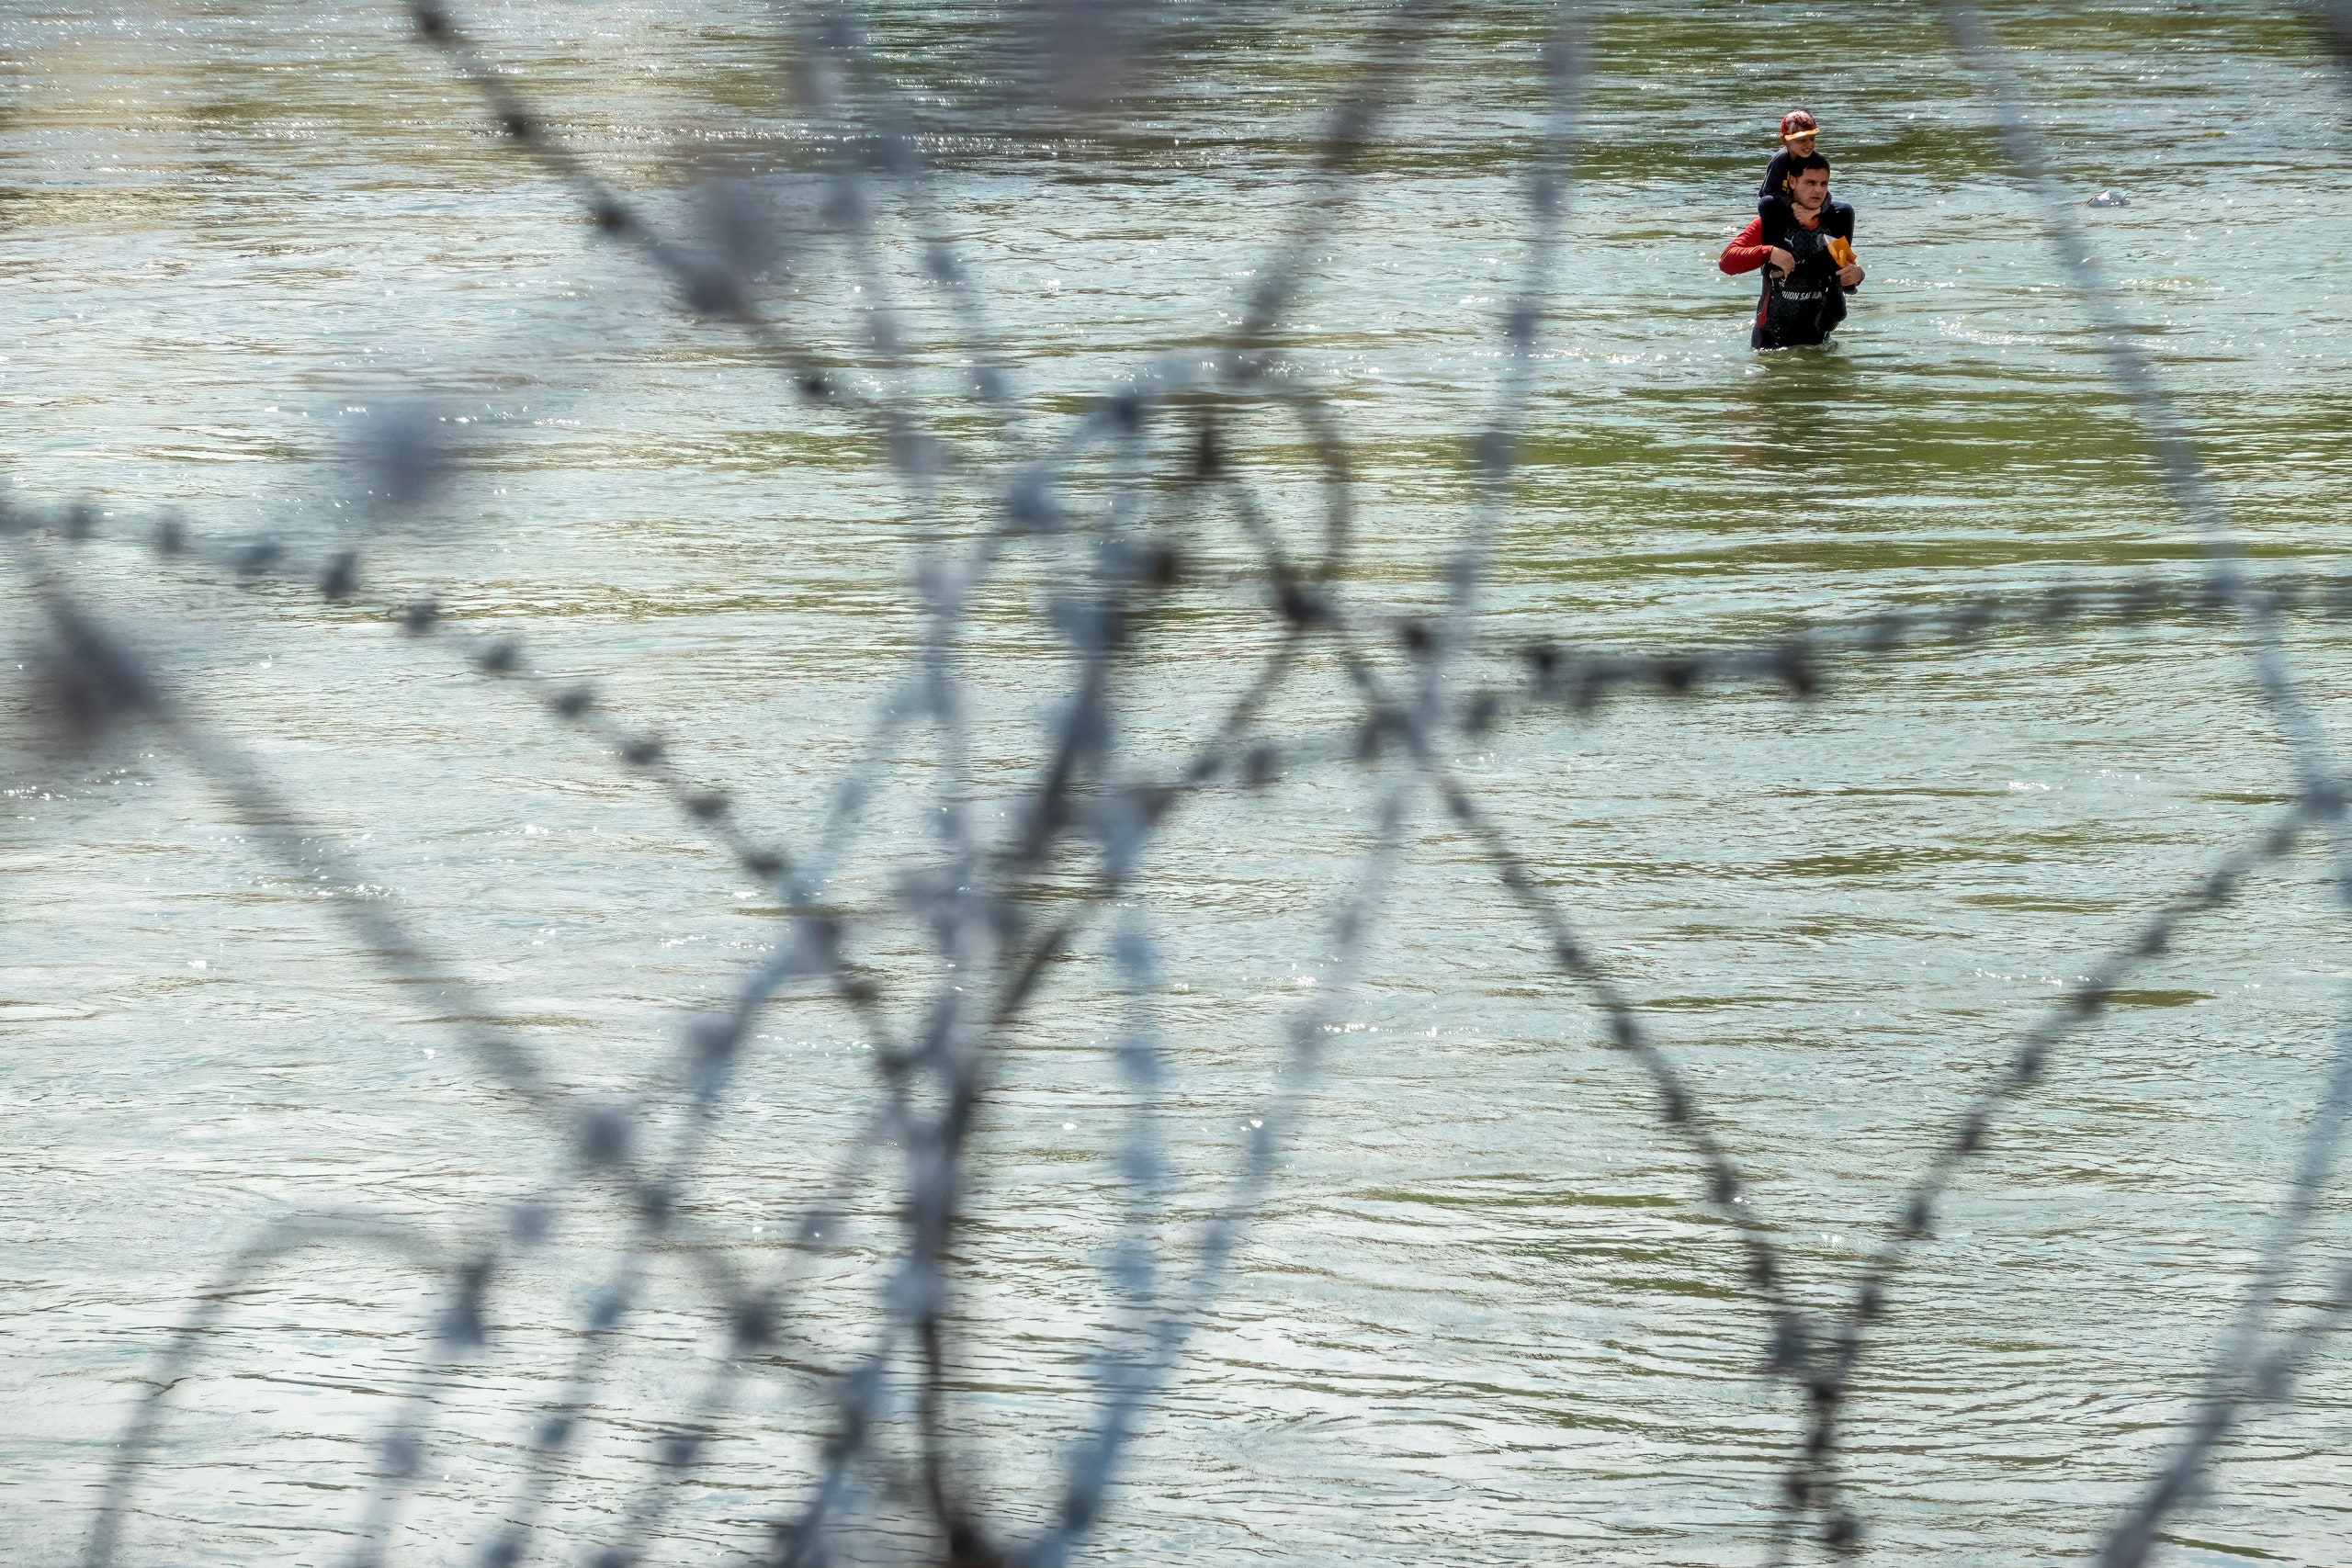 A photo of two people wading through a river as seen through a mess of wires.